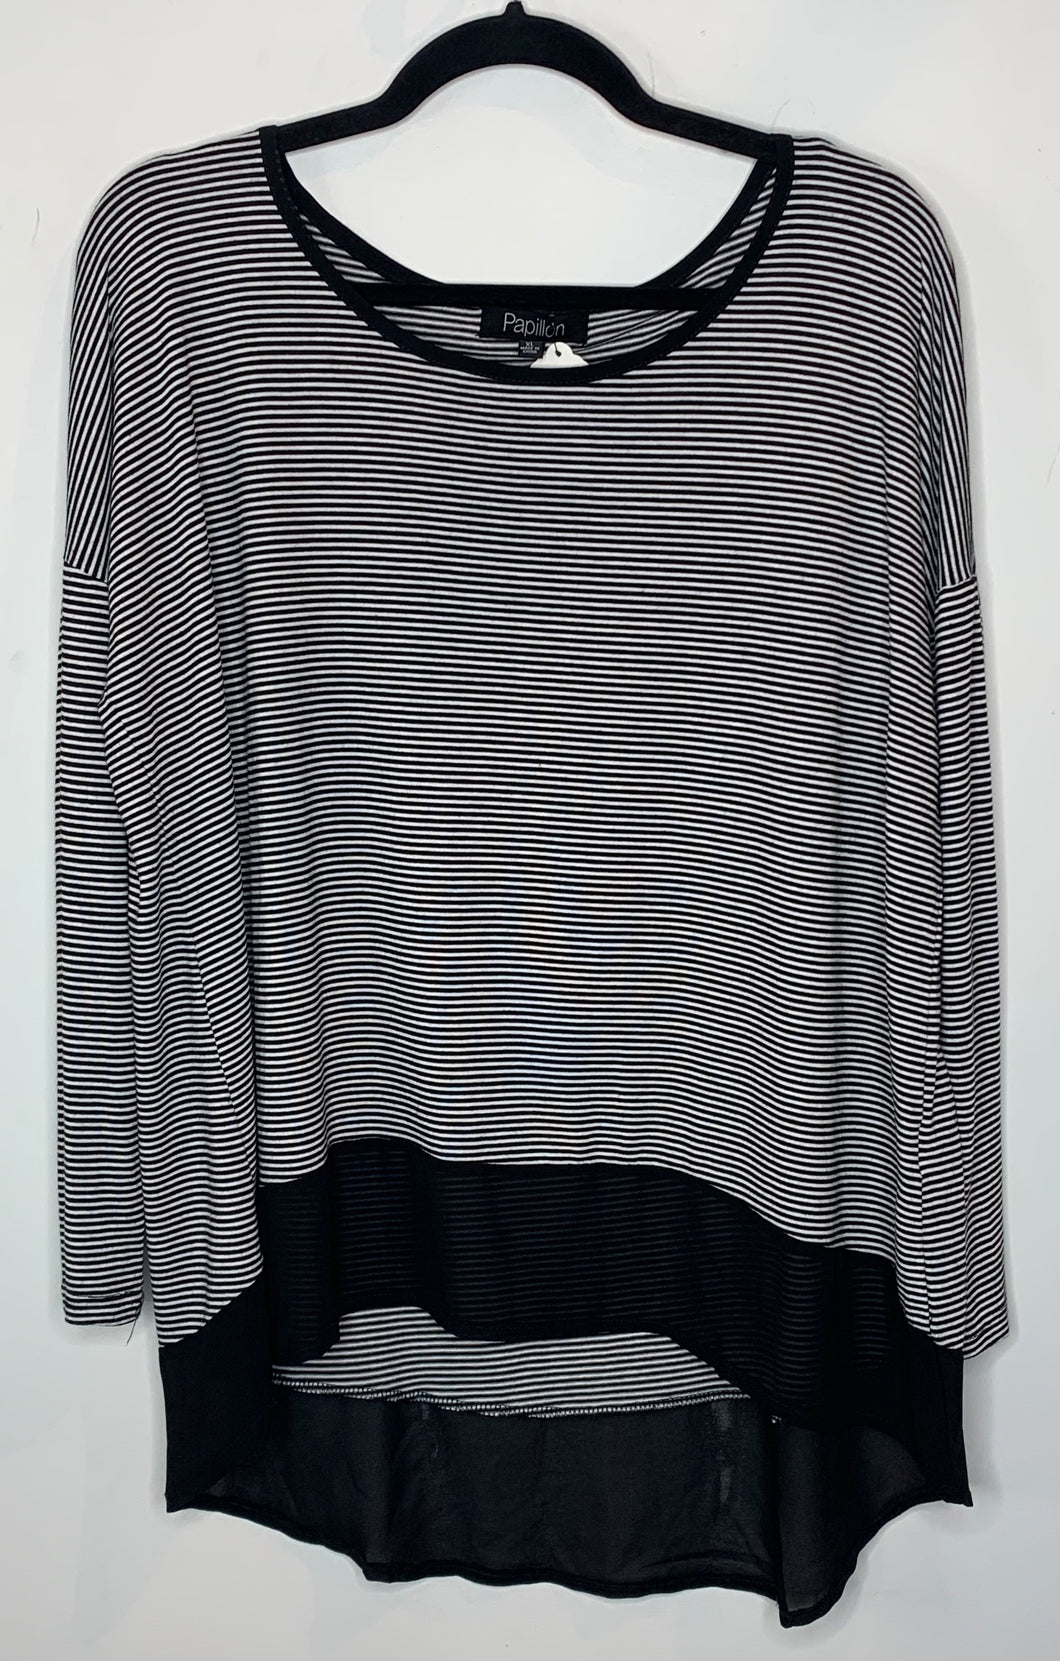 Black and White Striped Long Sleeved Shirt